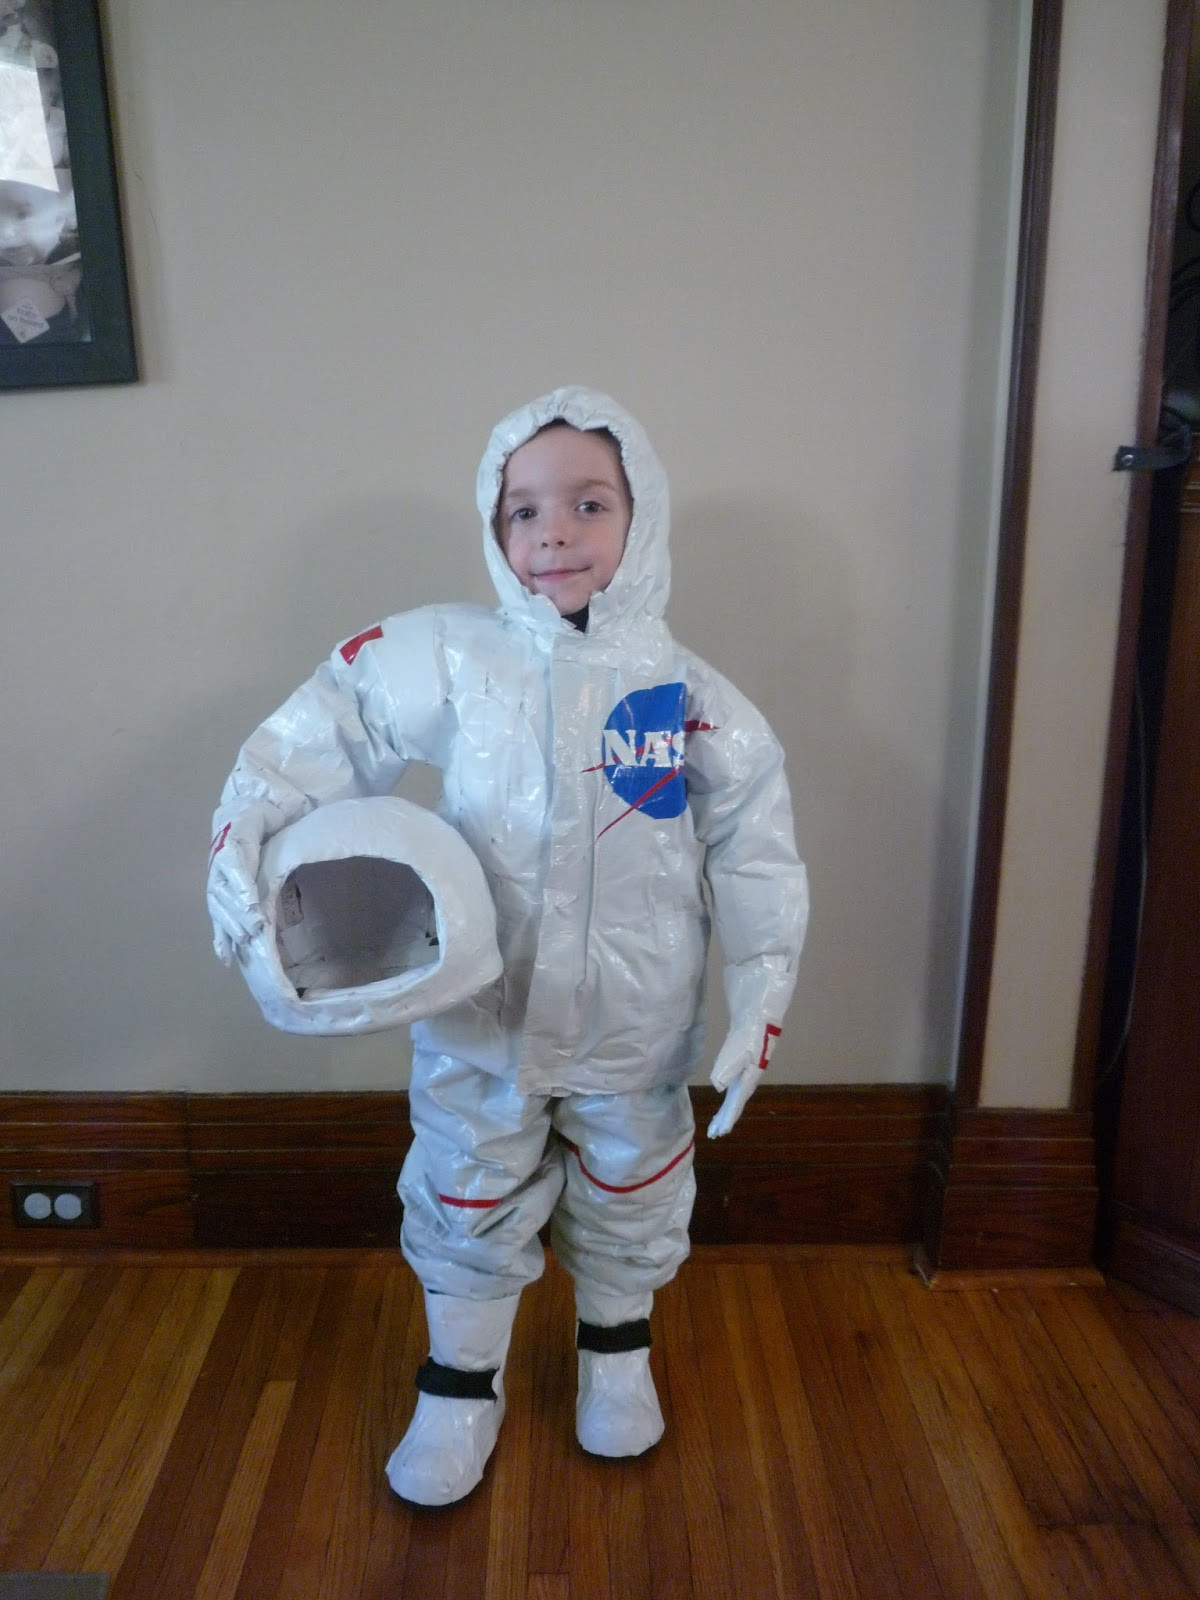 DIY Astronaut Costumes
 Full Time Frugal DIY childs costume $13 Astronaut